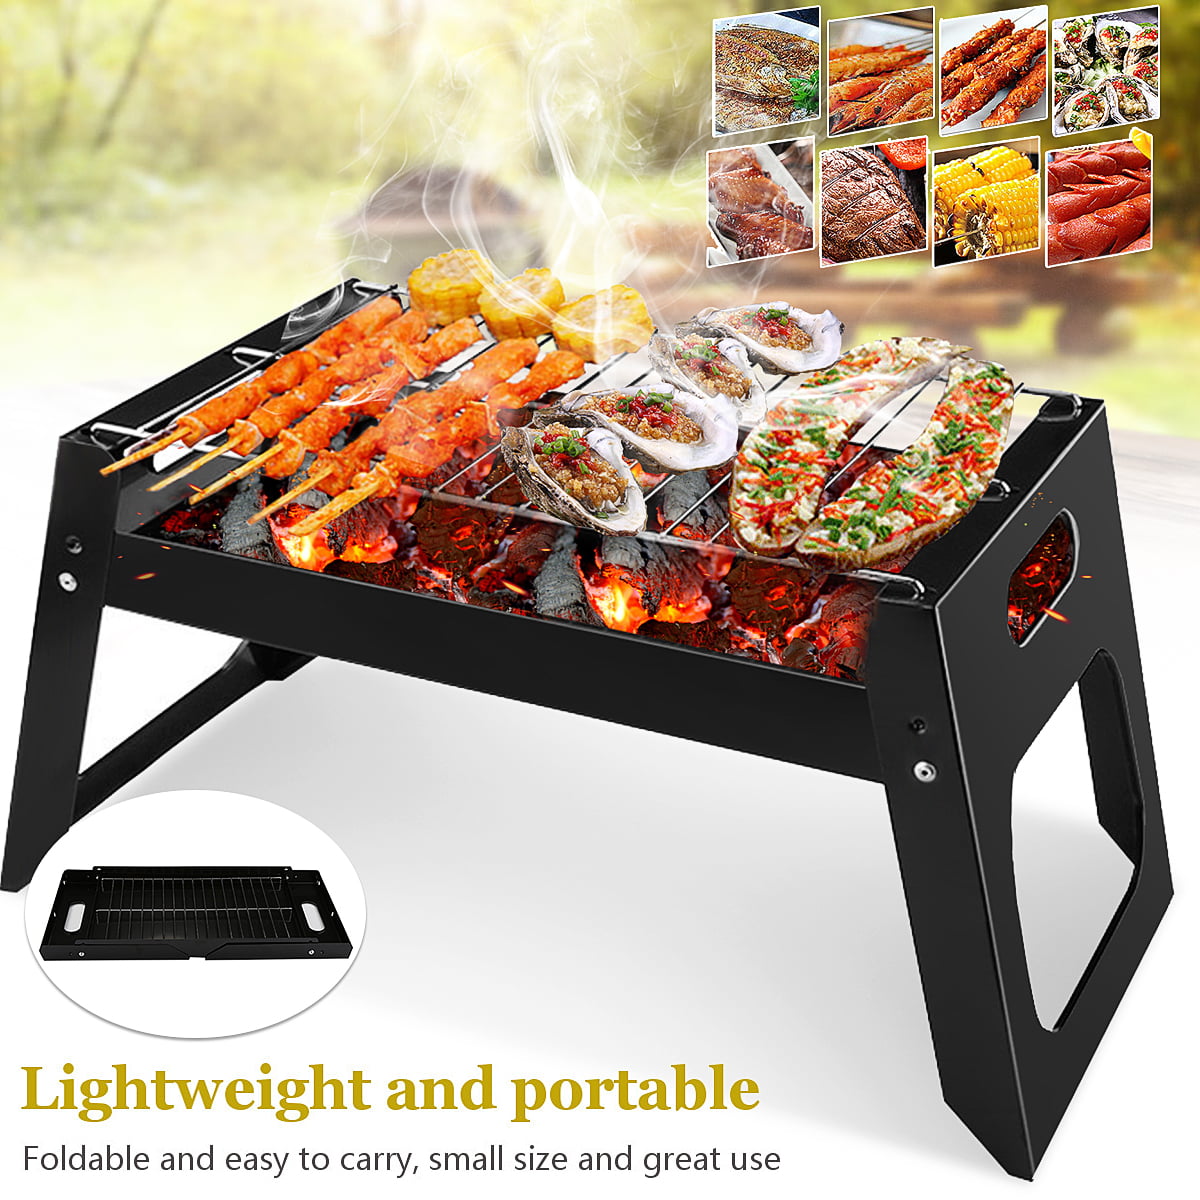 Portable Stainless steel Charcoal Grill Outdoor Camping Folding Cooking Stove QK 